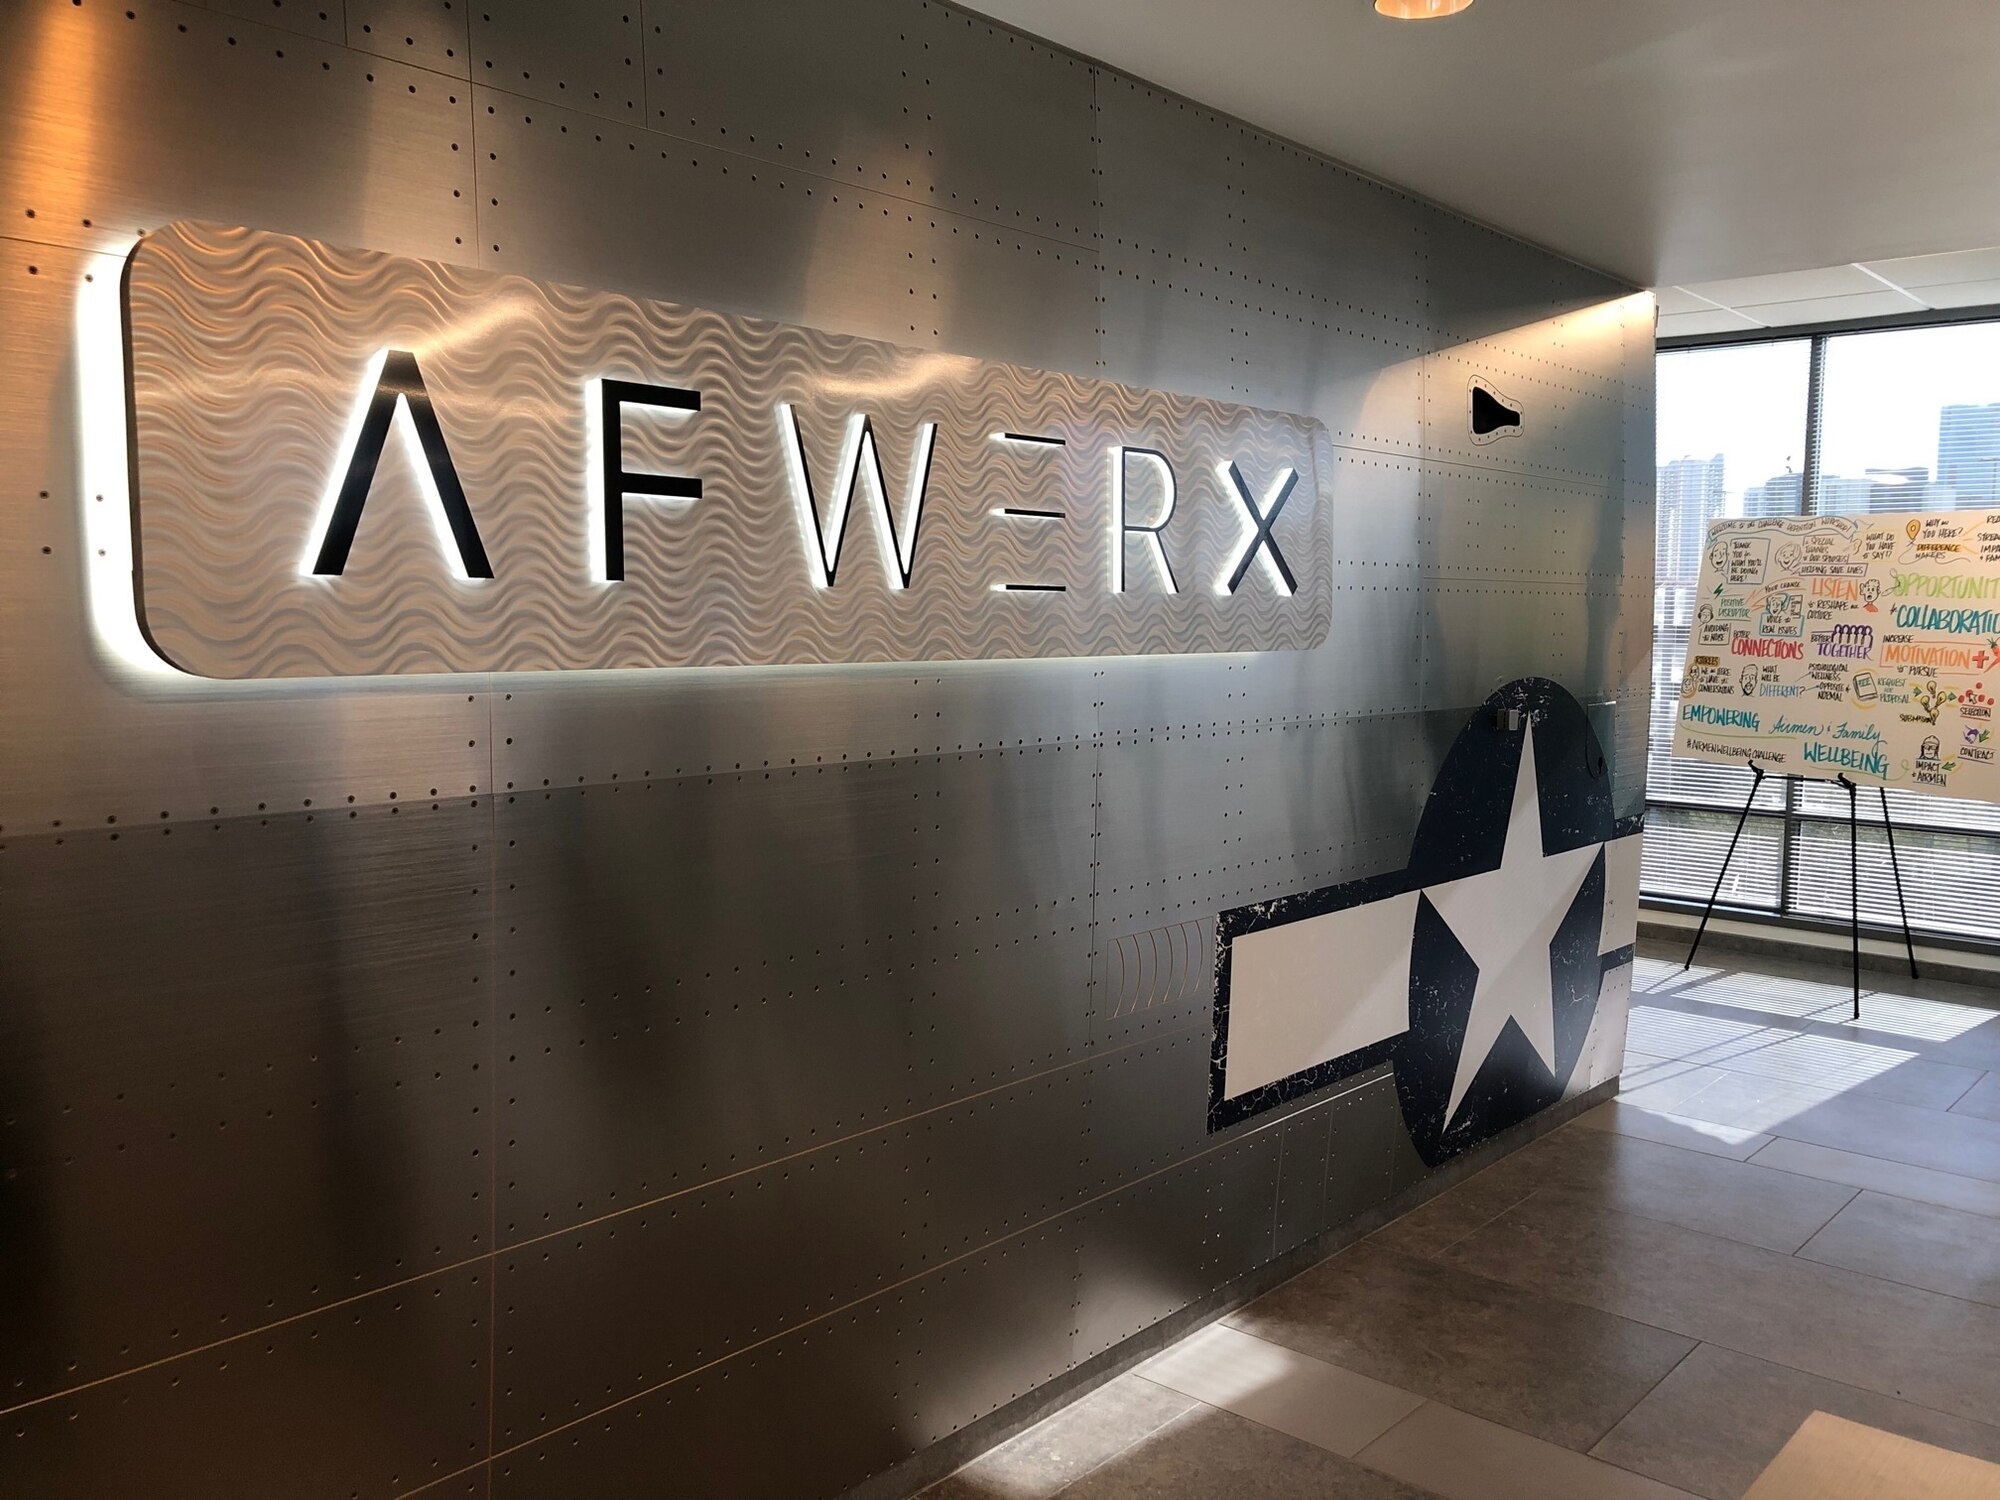 The 152nd Airlift Wing, Nevada Air National Guard, became the newest unit to develop an AFWERX spark cell with the creation of "Silver State Spark" in February 2020. About 70 spark cells launched around the world since the U.S. Air Force debuted AFWERX in 2017, mostly active-duty. (U.S. Air National Guard photo by 2nd Lt. Emerson Marcus)